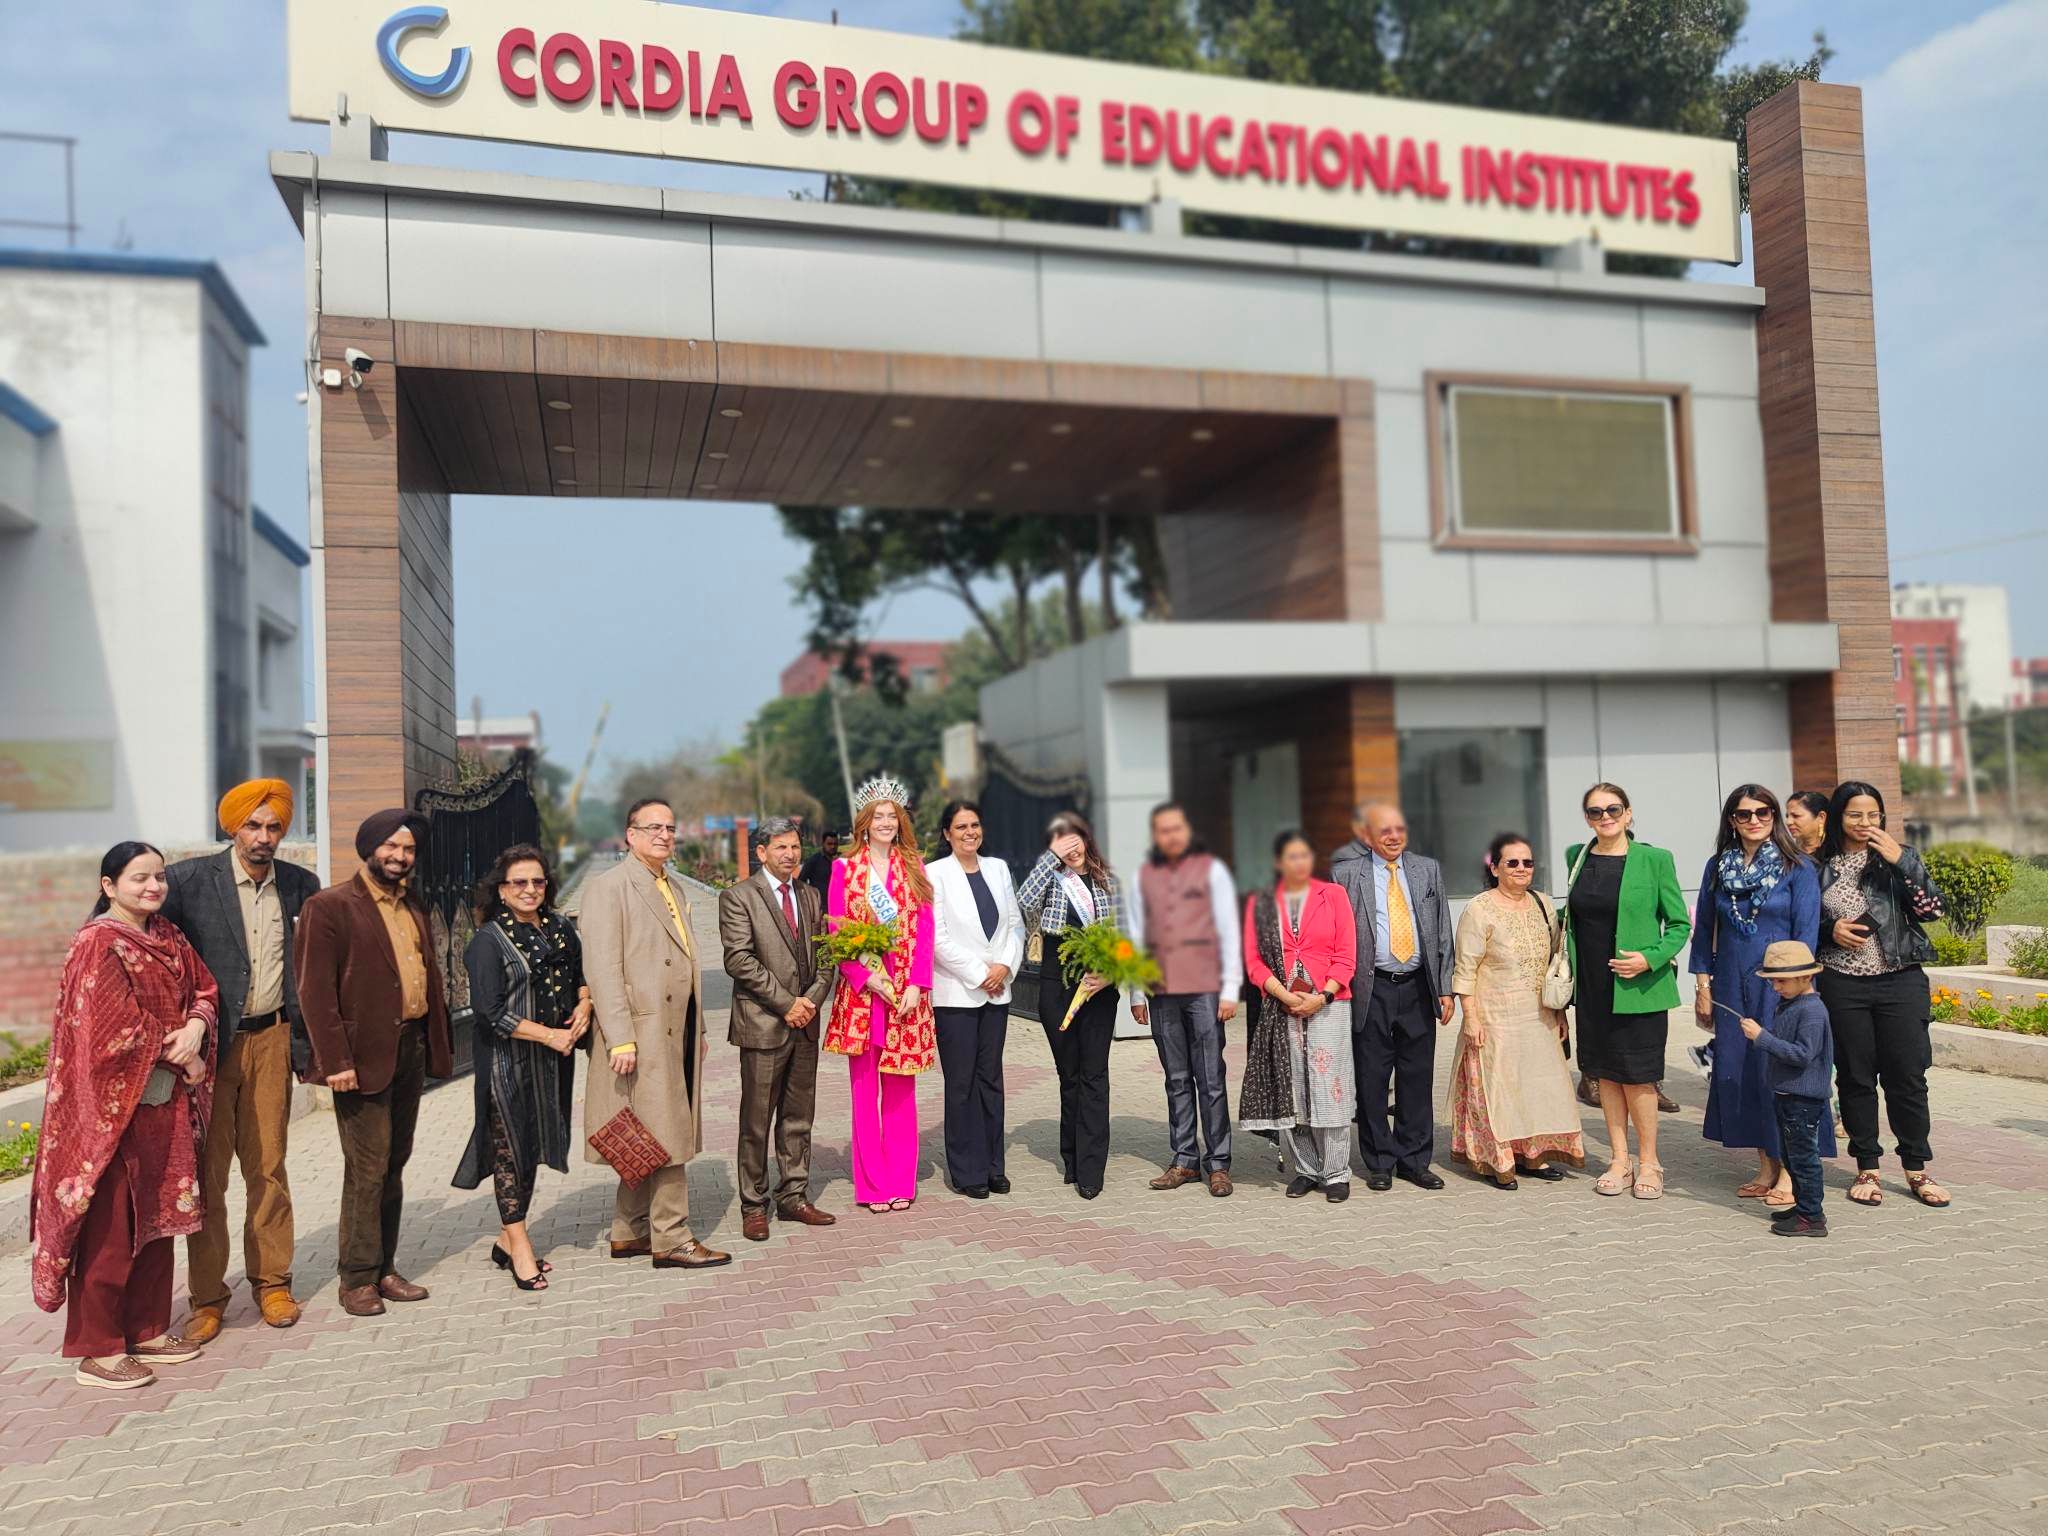 A visit to the Cordia Institutes based in Sanghol